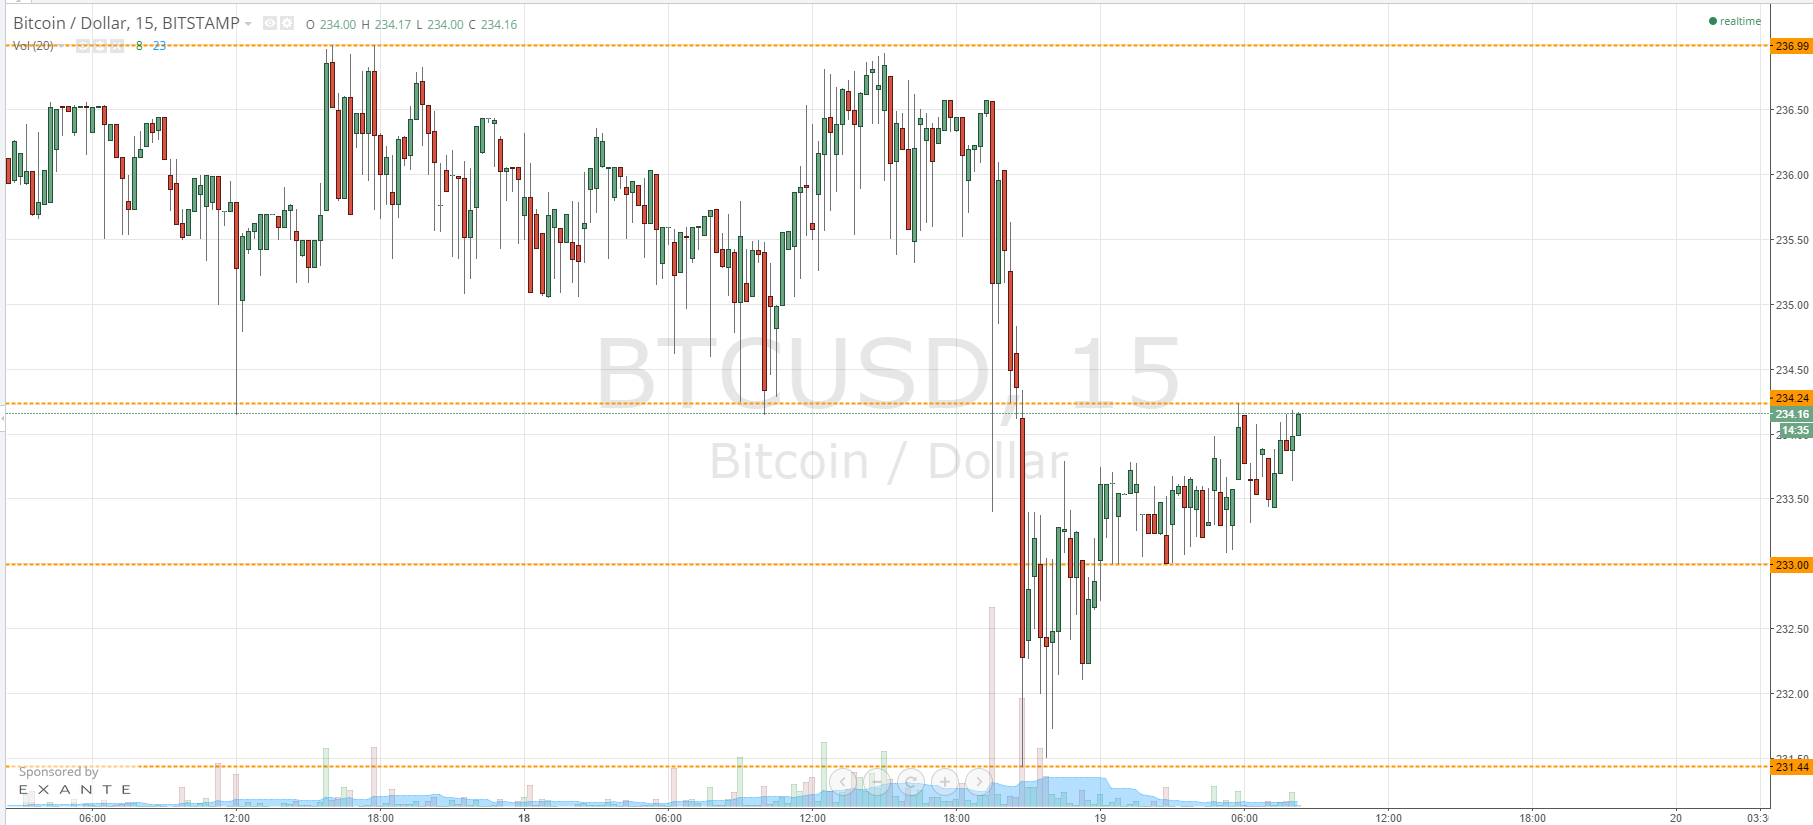 Bitcoin Price Breaks; Recovery on the Cards?